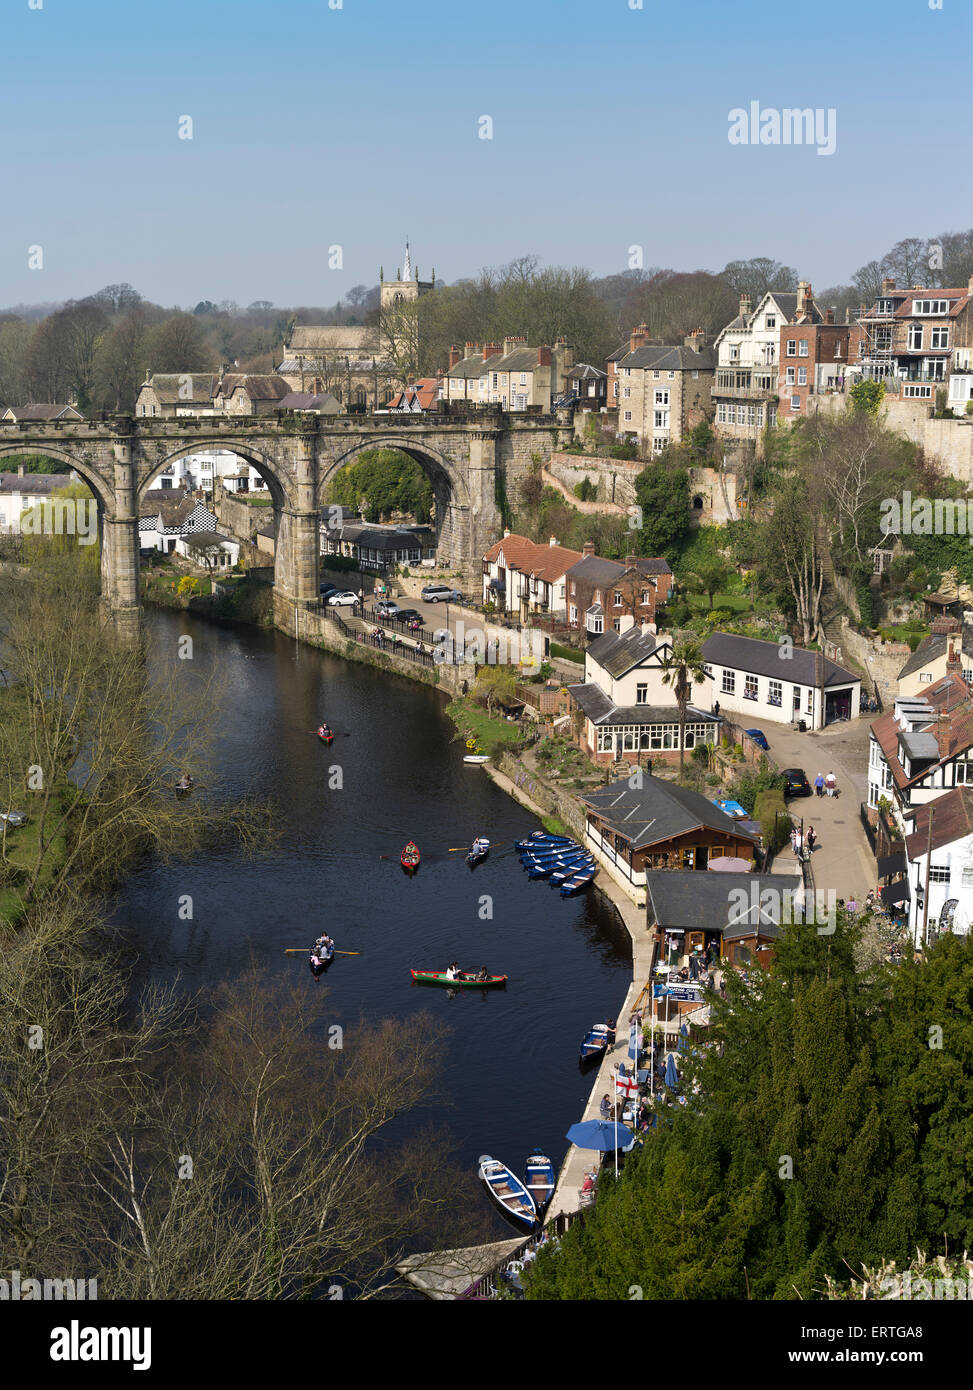 dh Knaresborough river KNARESBOROUGH NORTH YORKSHIRE Yorkshire river railway viaduct and view of town by River Nidd Stock Photo